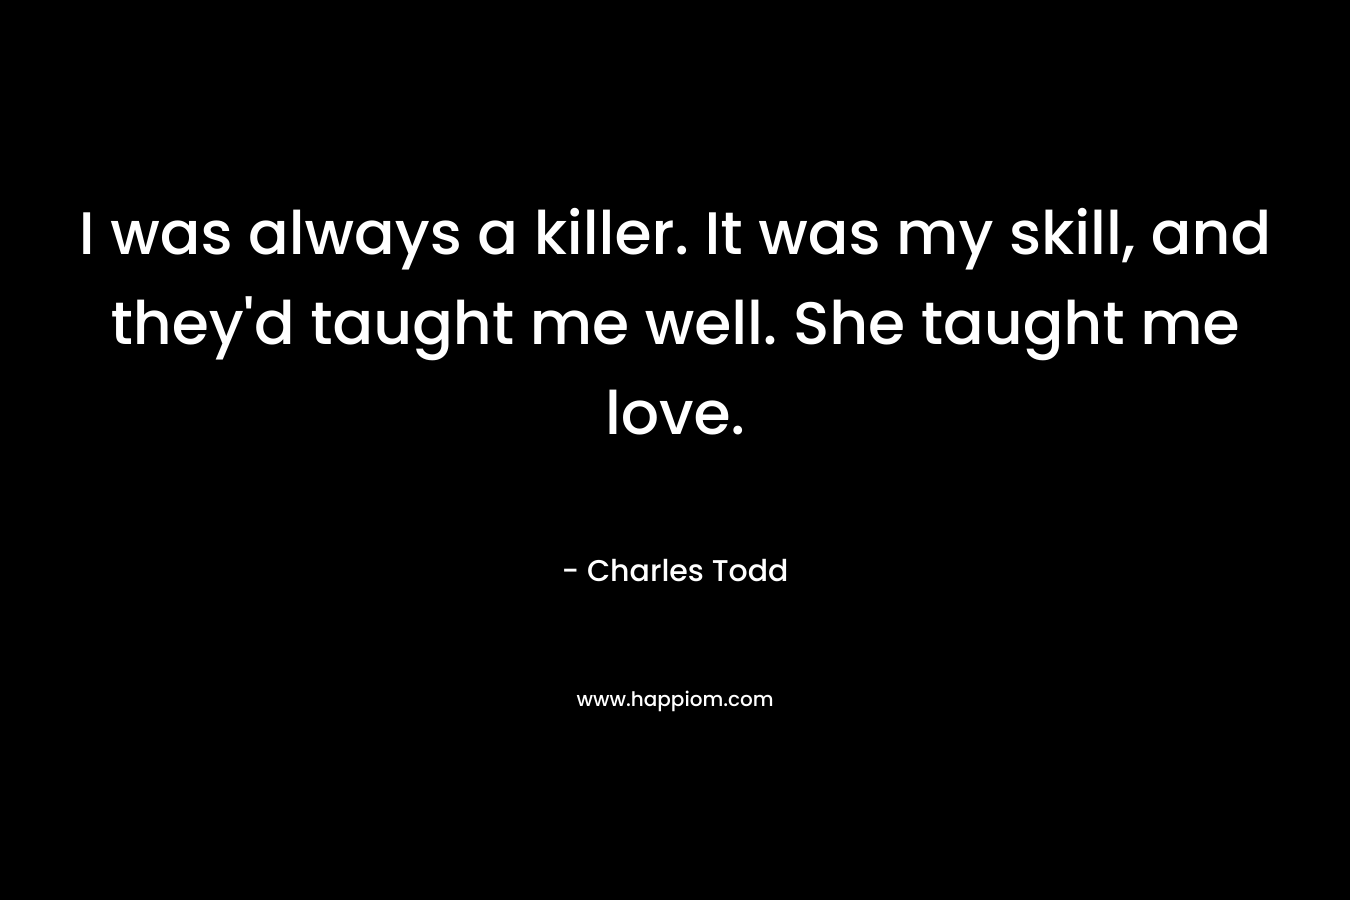 I was always a killer. It was my skill, and they'd taught me well. She taught me love.